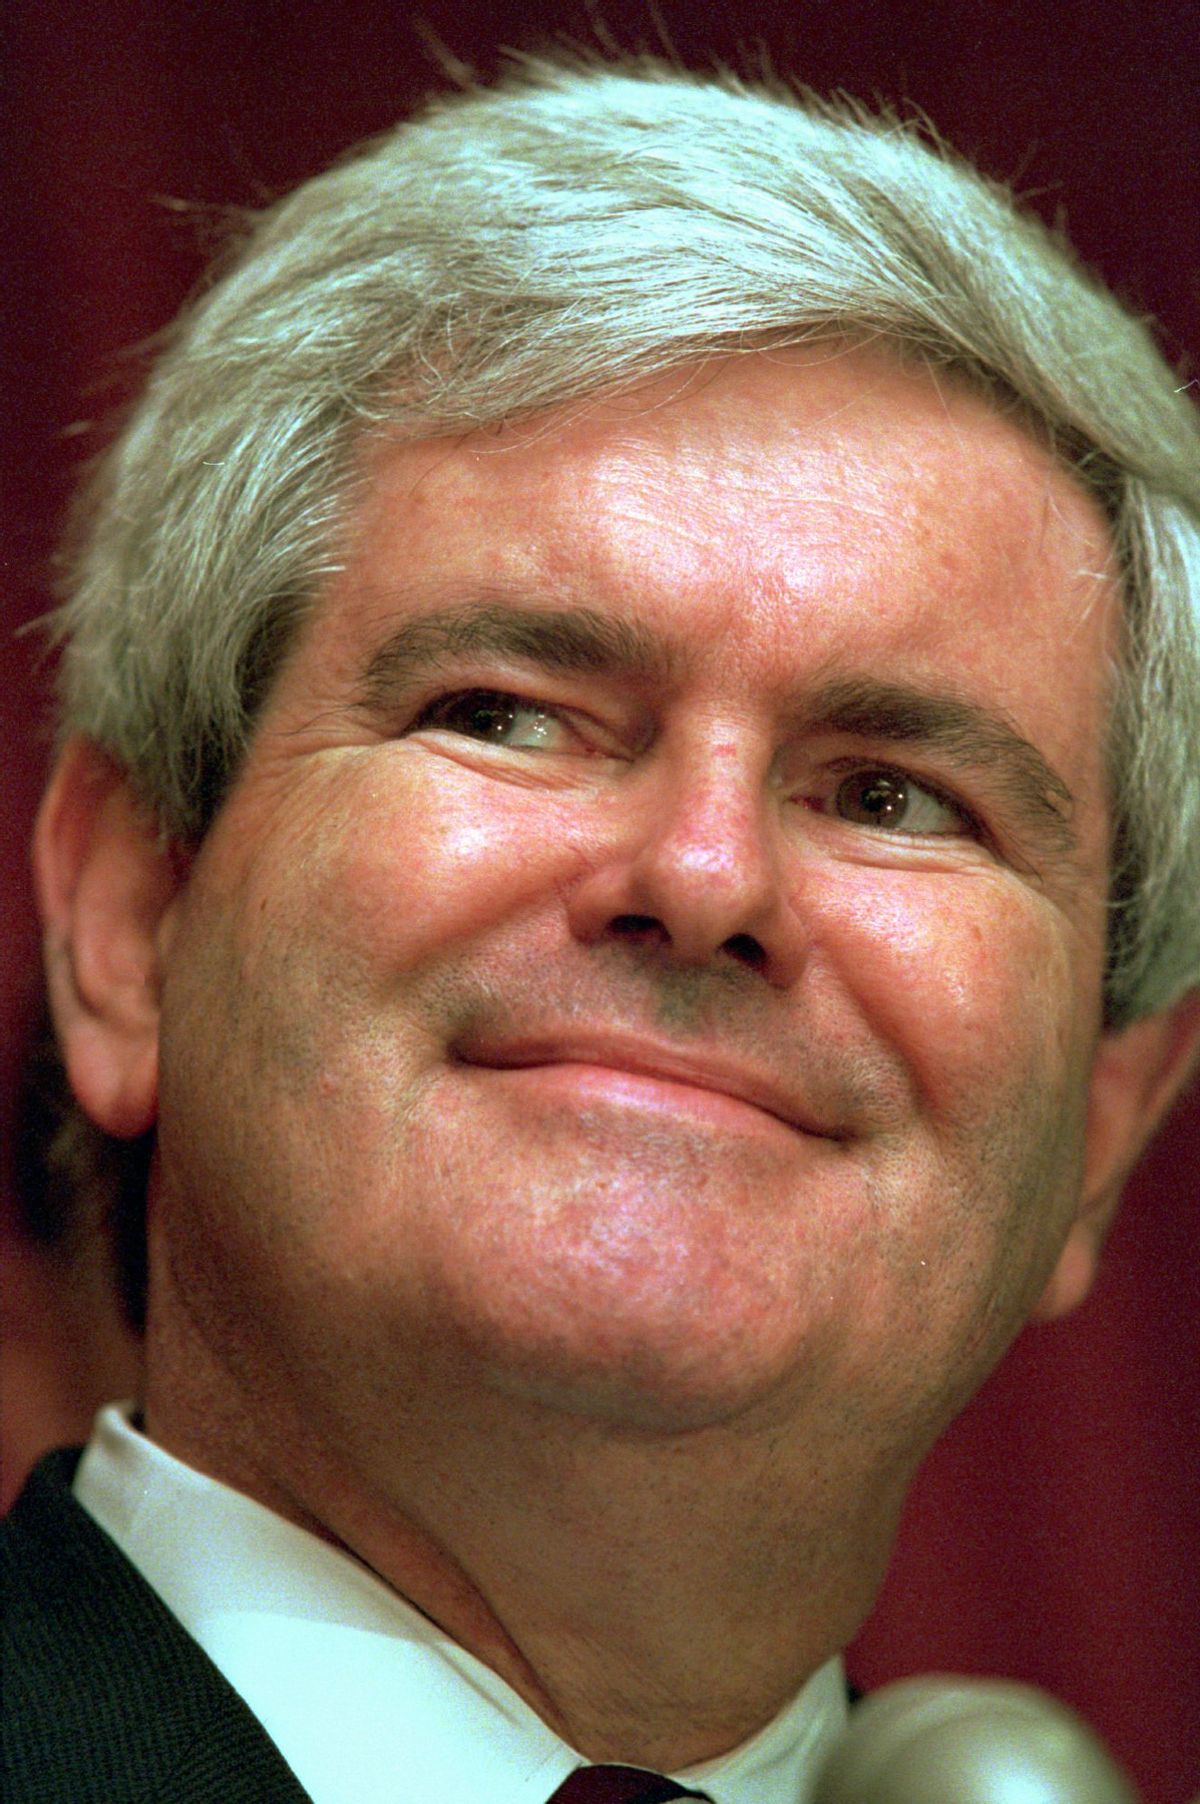 House Speaker Newt Gingrich of Georgia is shown in this March 13, 1995 photo in Washington. (AP Photo/J. Scott Applewhite)  (Associated Press)